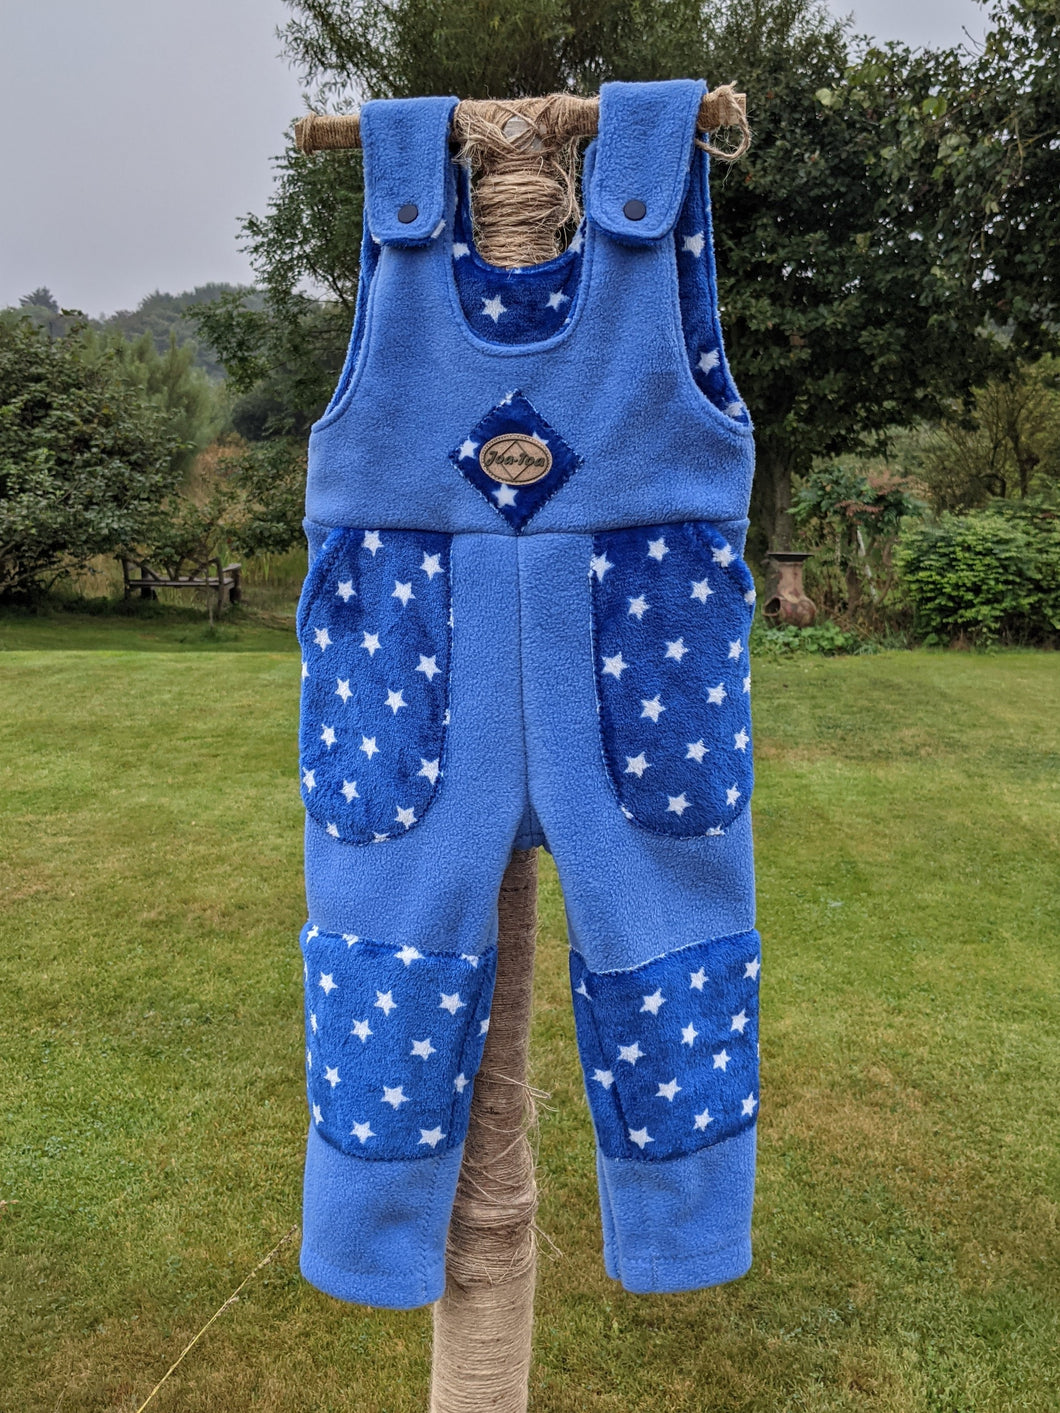 Kid's fleece dungarees in sky blue with blue stars.